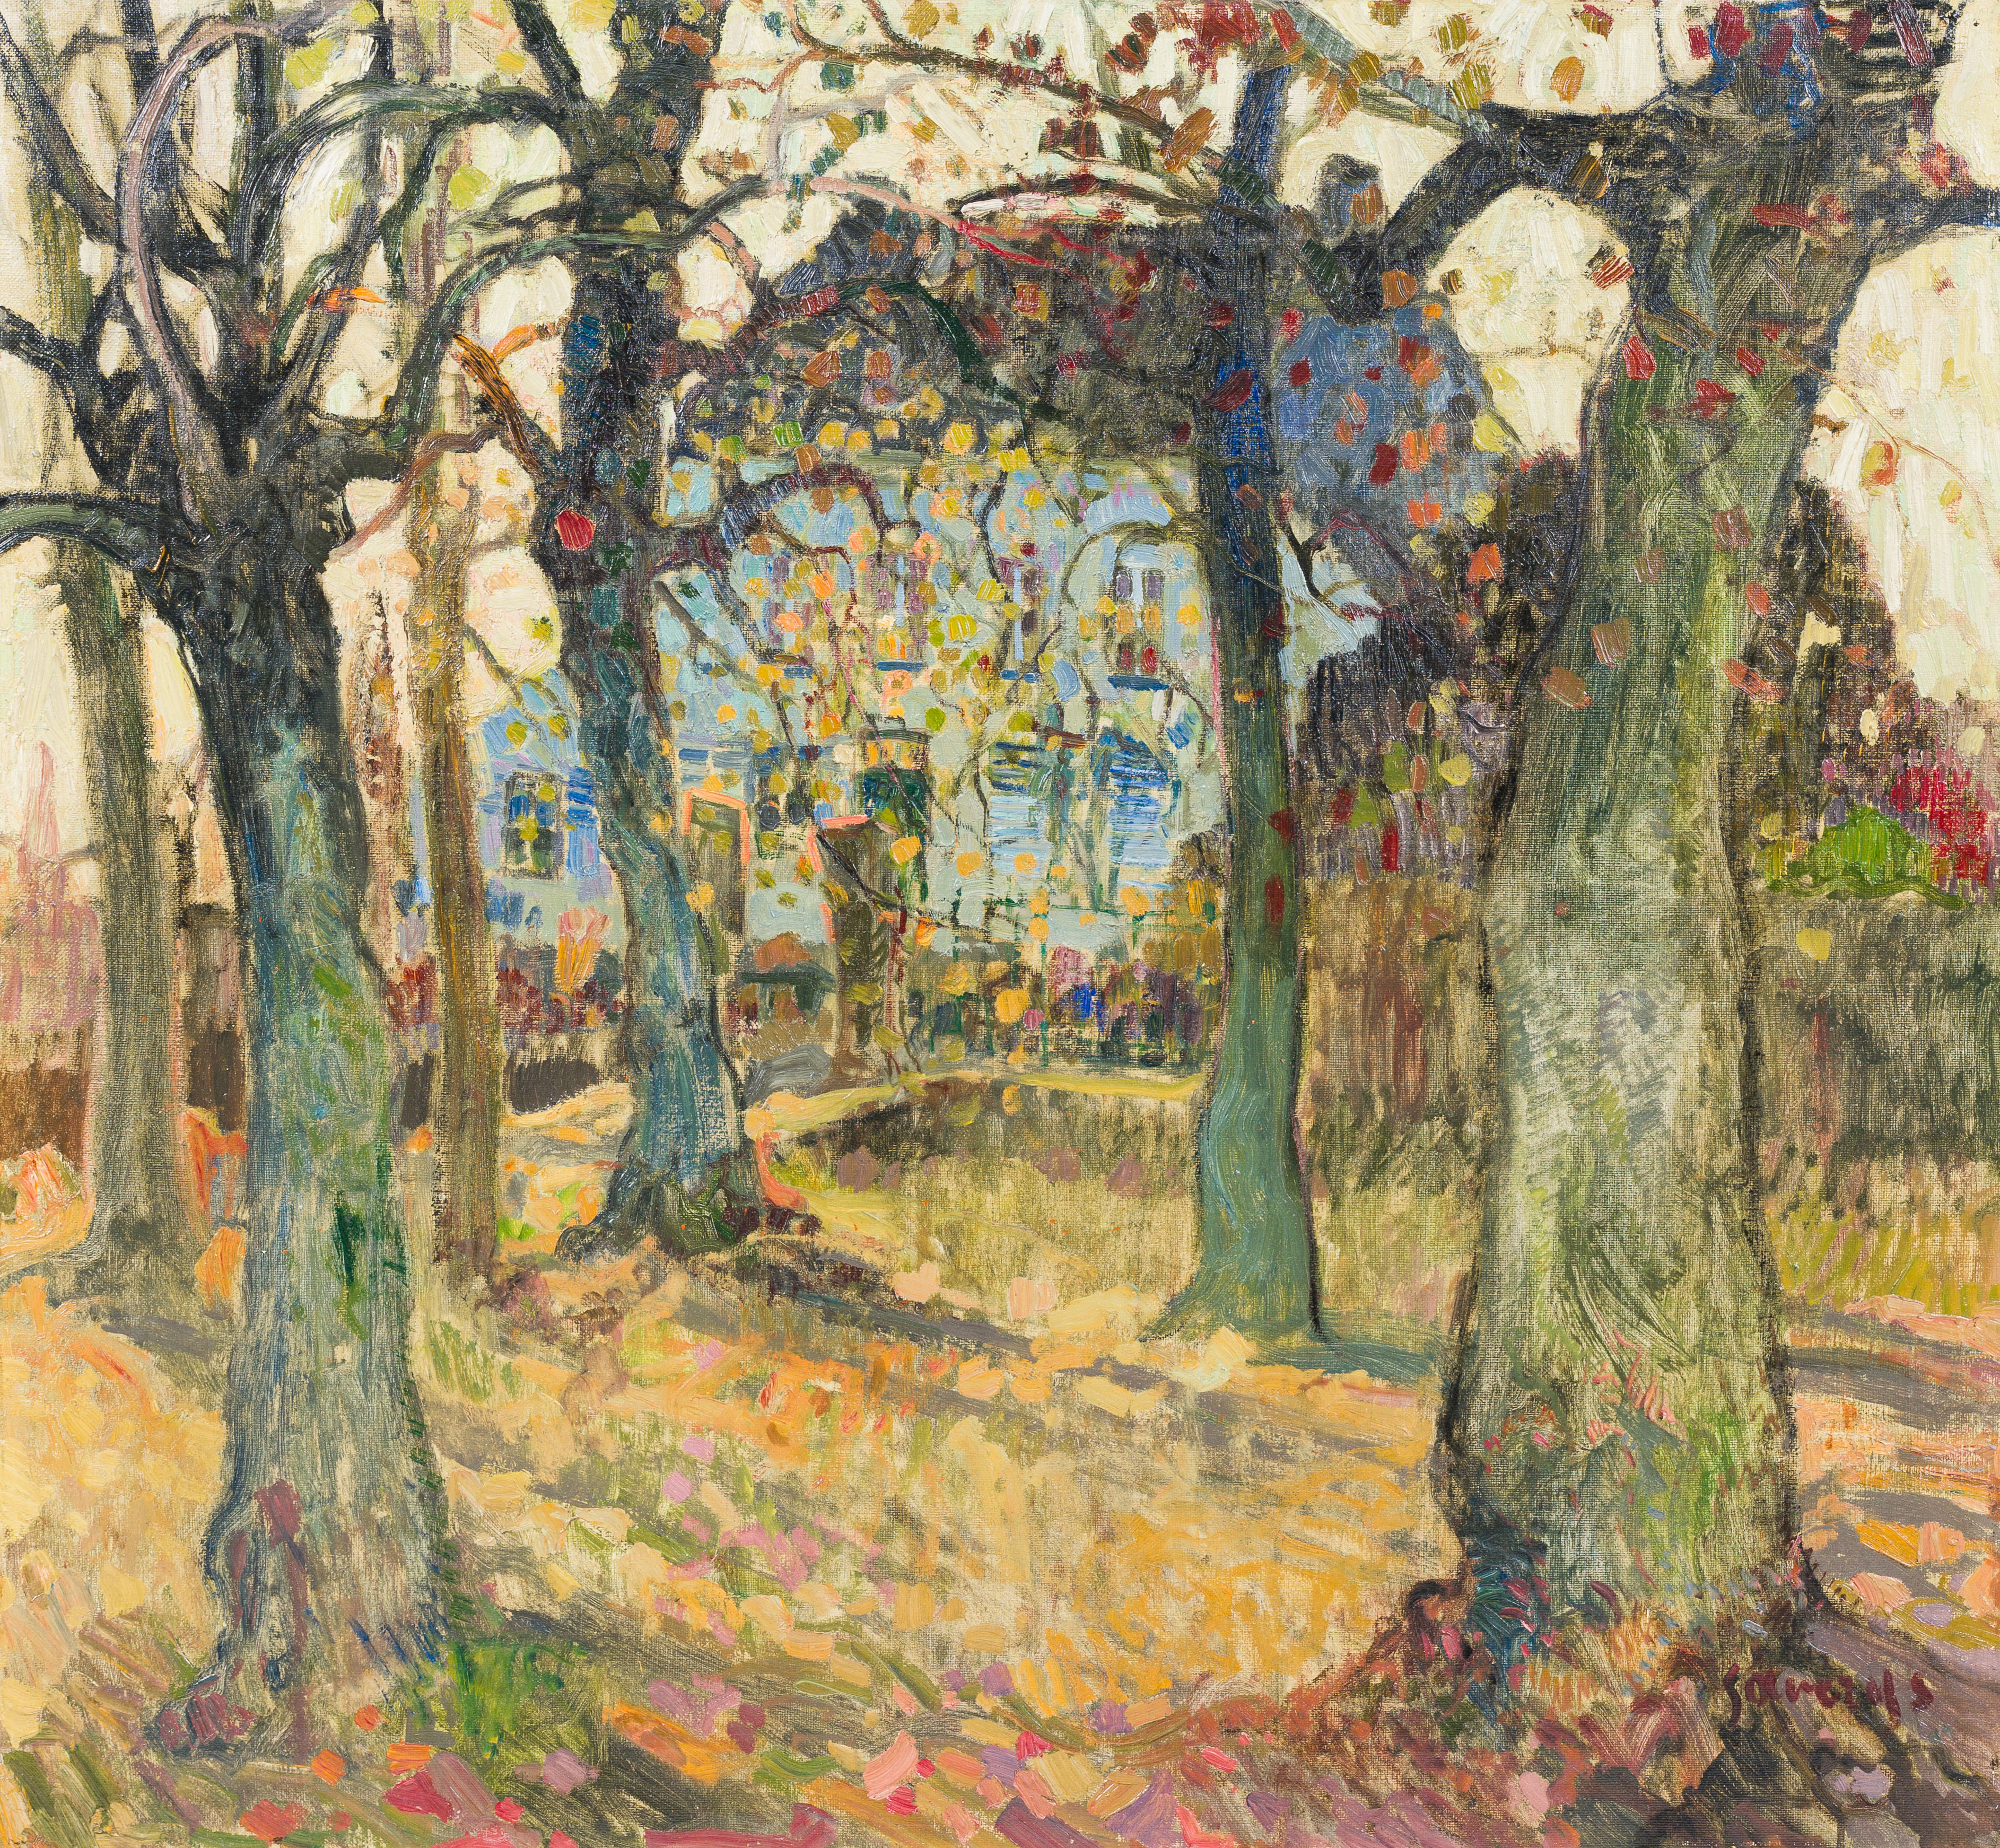 Albert Saverys (1886-1964): Presbytery in Bachte-Maria-Leerne, oil on canvas